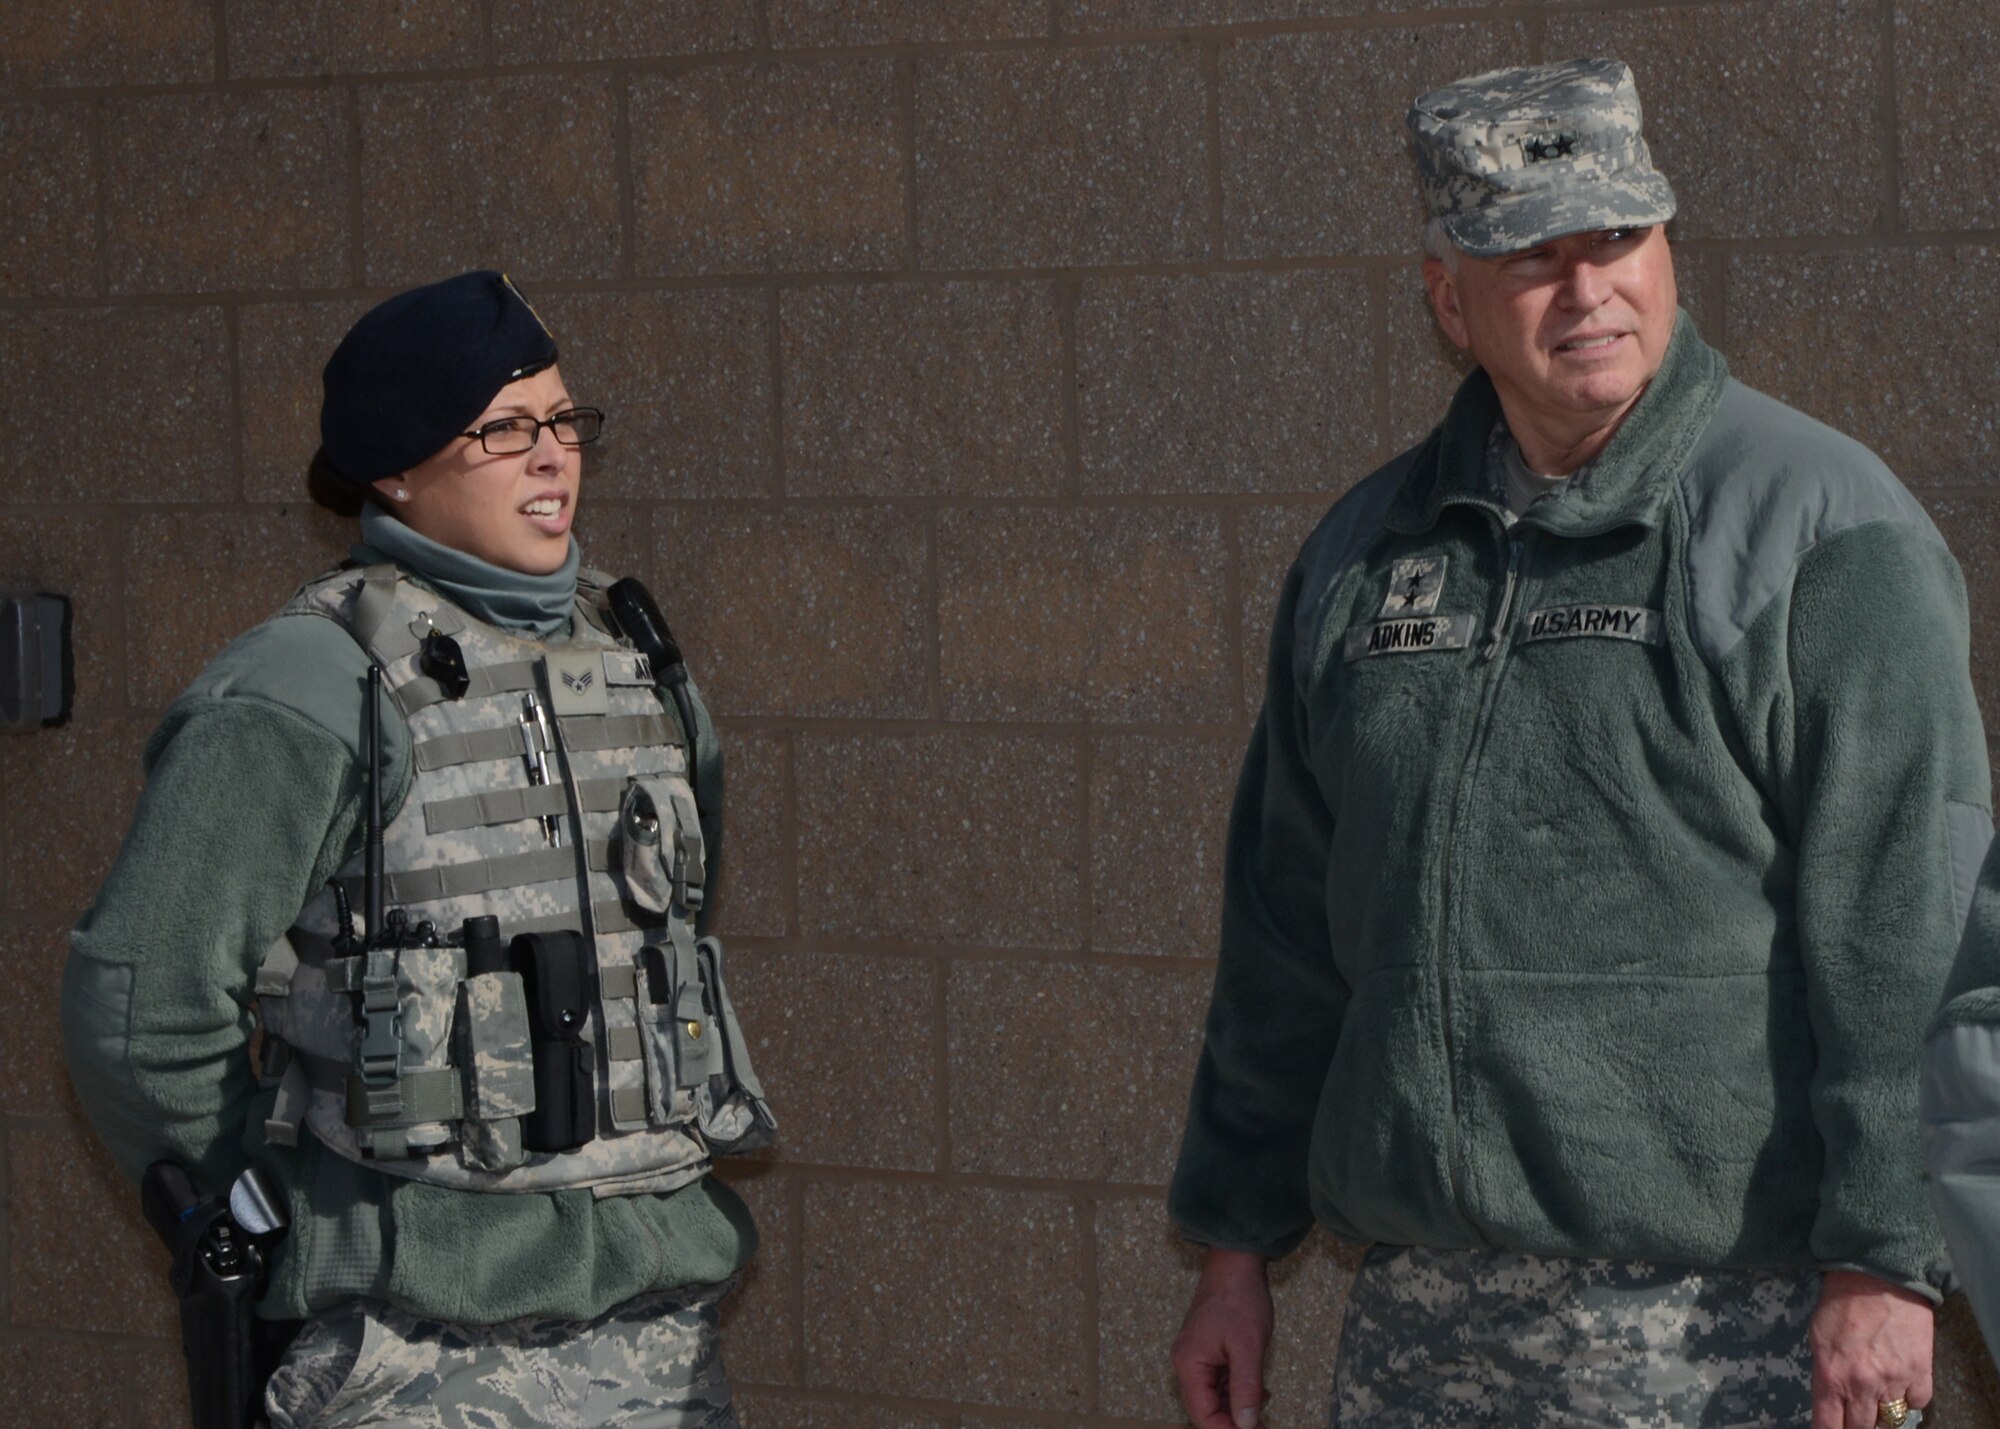 U.S. Army Maj. Gen. James Adkins, the Adjutant General for the Maryland National Guard, speaks with Senior Airman Miriam Jarvis, 175th Security Forces Squadron, during his inspection of the 175th Wing facilities.  The inspection took place January 31, 2014 at Warfield Air National Guard base, Baltimore, Md. (Air National Guard photo by Tech. Sgt. Chris Schepers/RELEASED)